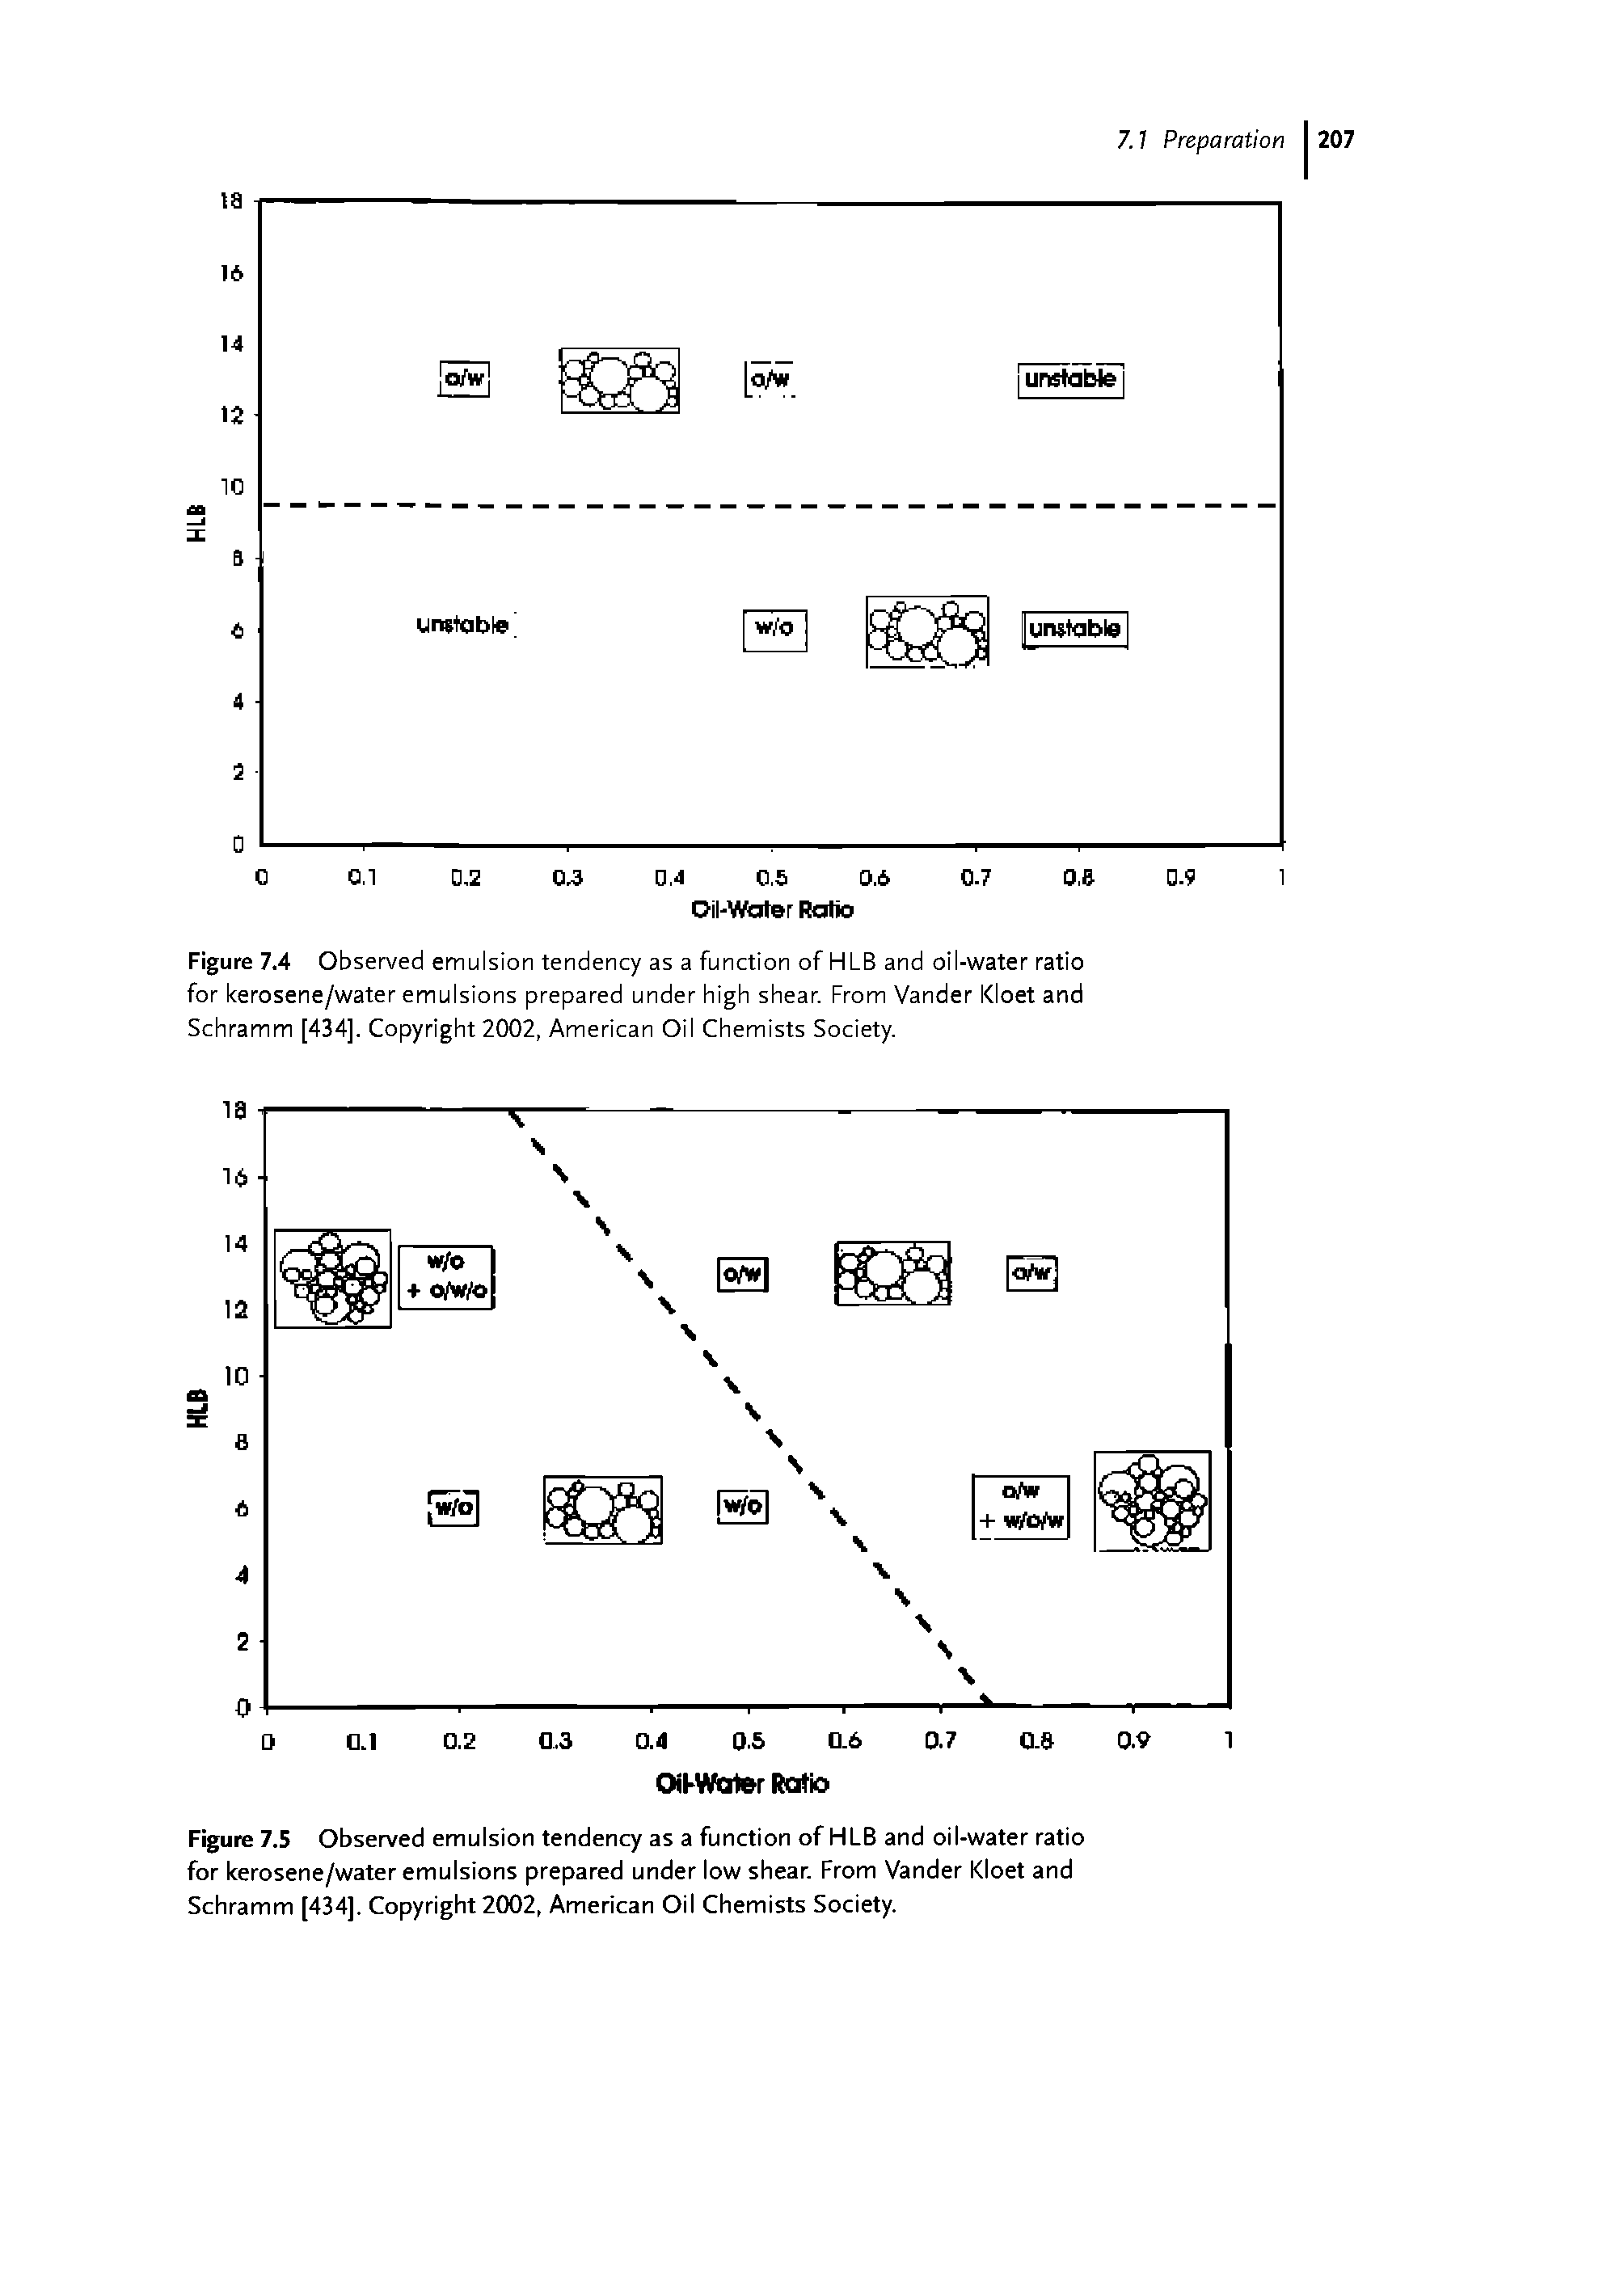 Figure 7.4 Observed emulsion tendency as a function of HLB and oil-water ratio for kerosene/water emulsions prepared under high shear. From Vander Kloet and Schramm [434]. Copyright 2002, American Oil Chemists Society.